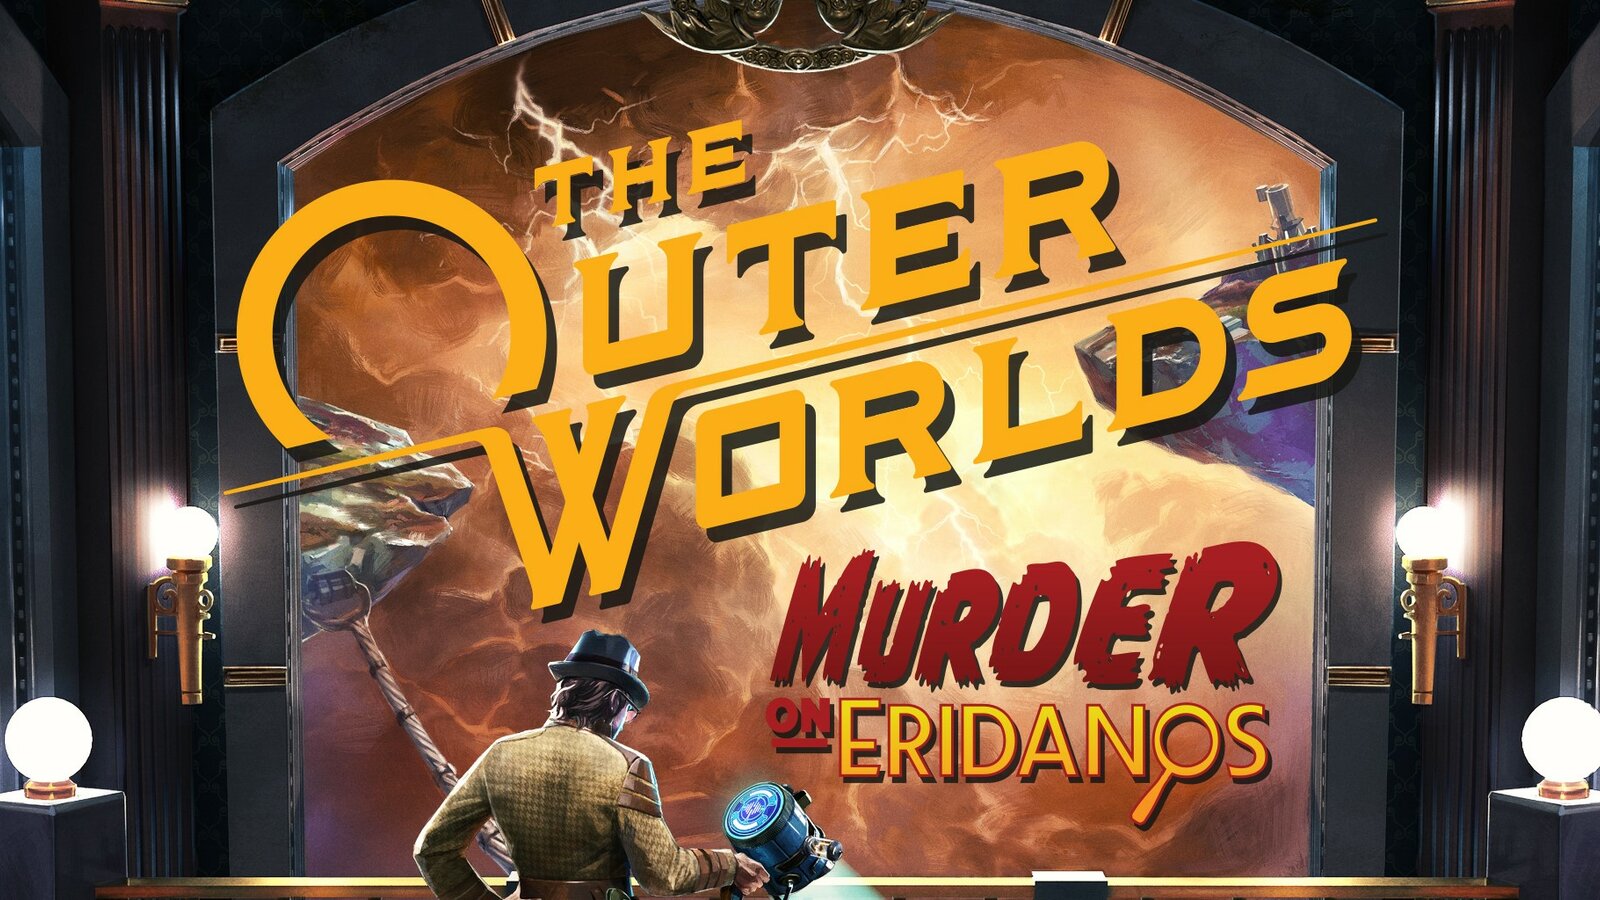 The Outer Worlds - Murder on Eridanos